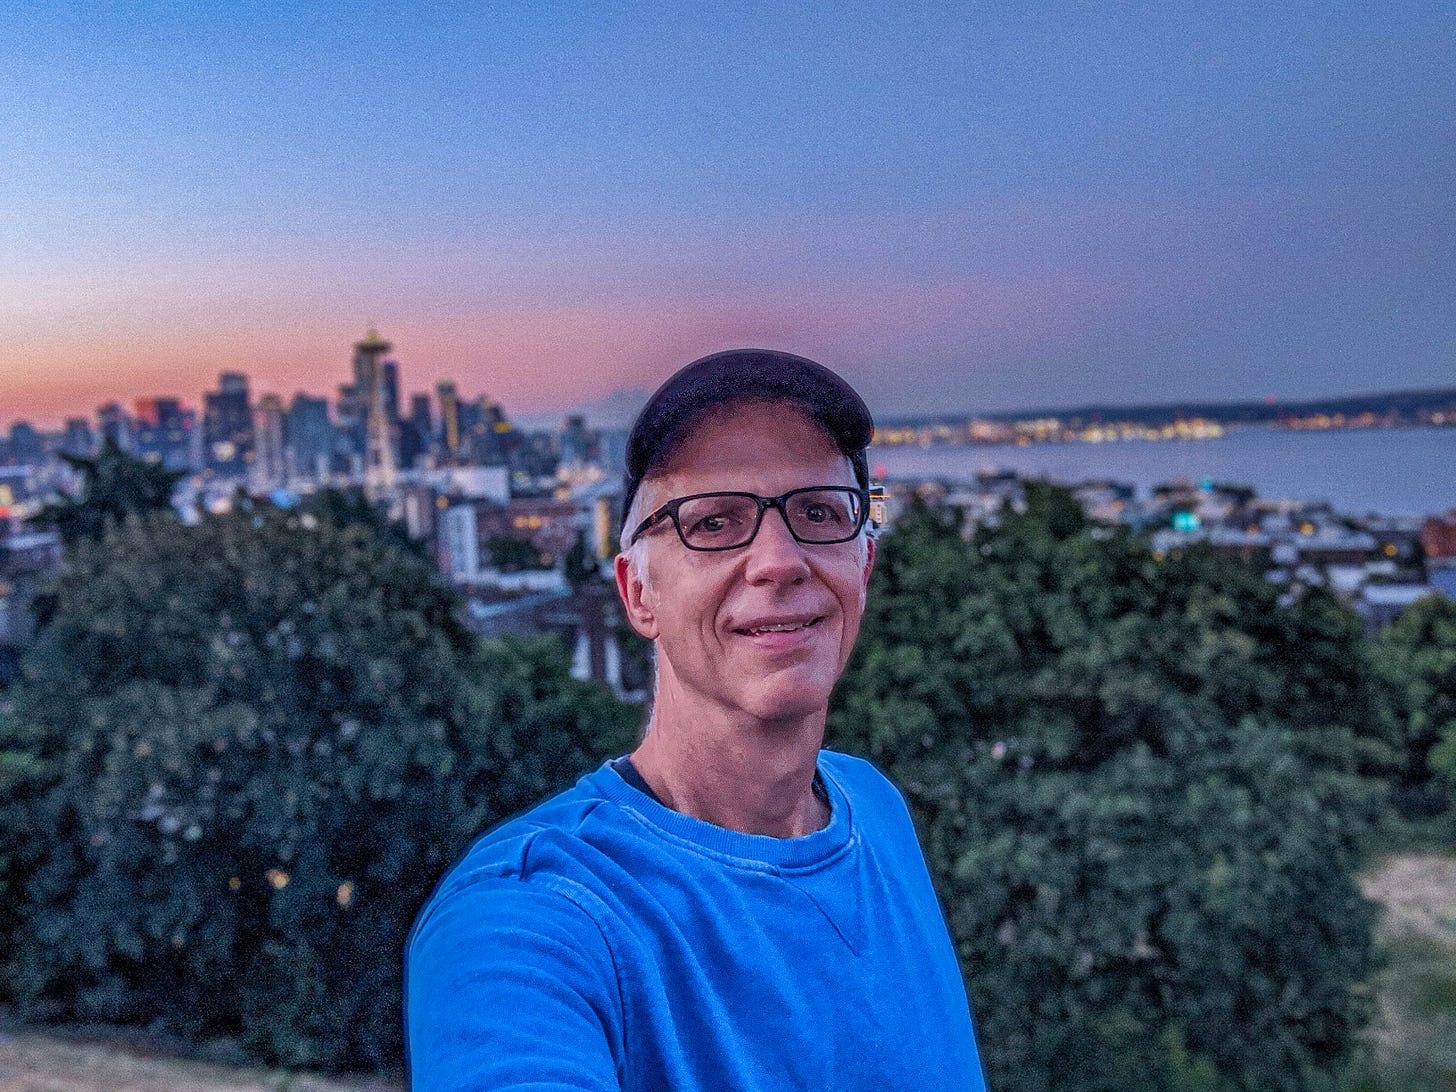 The city of Seattle behind Michael as the sun comes up.